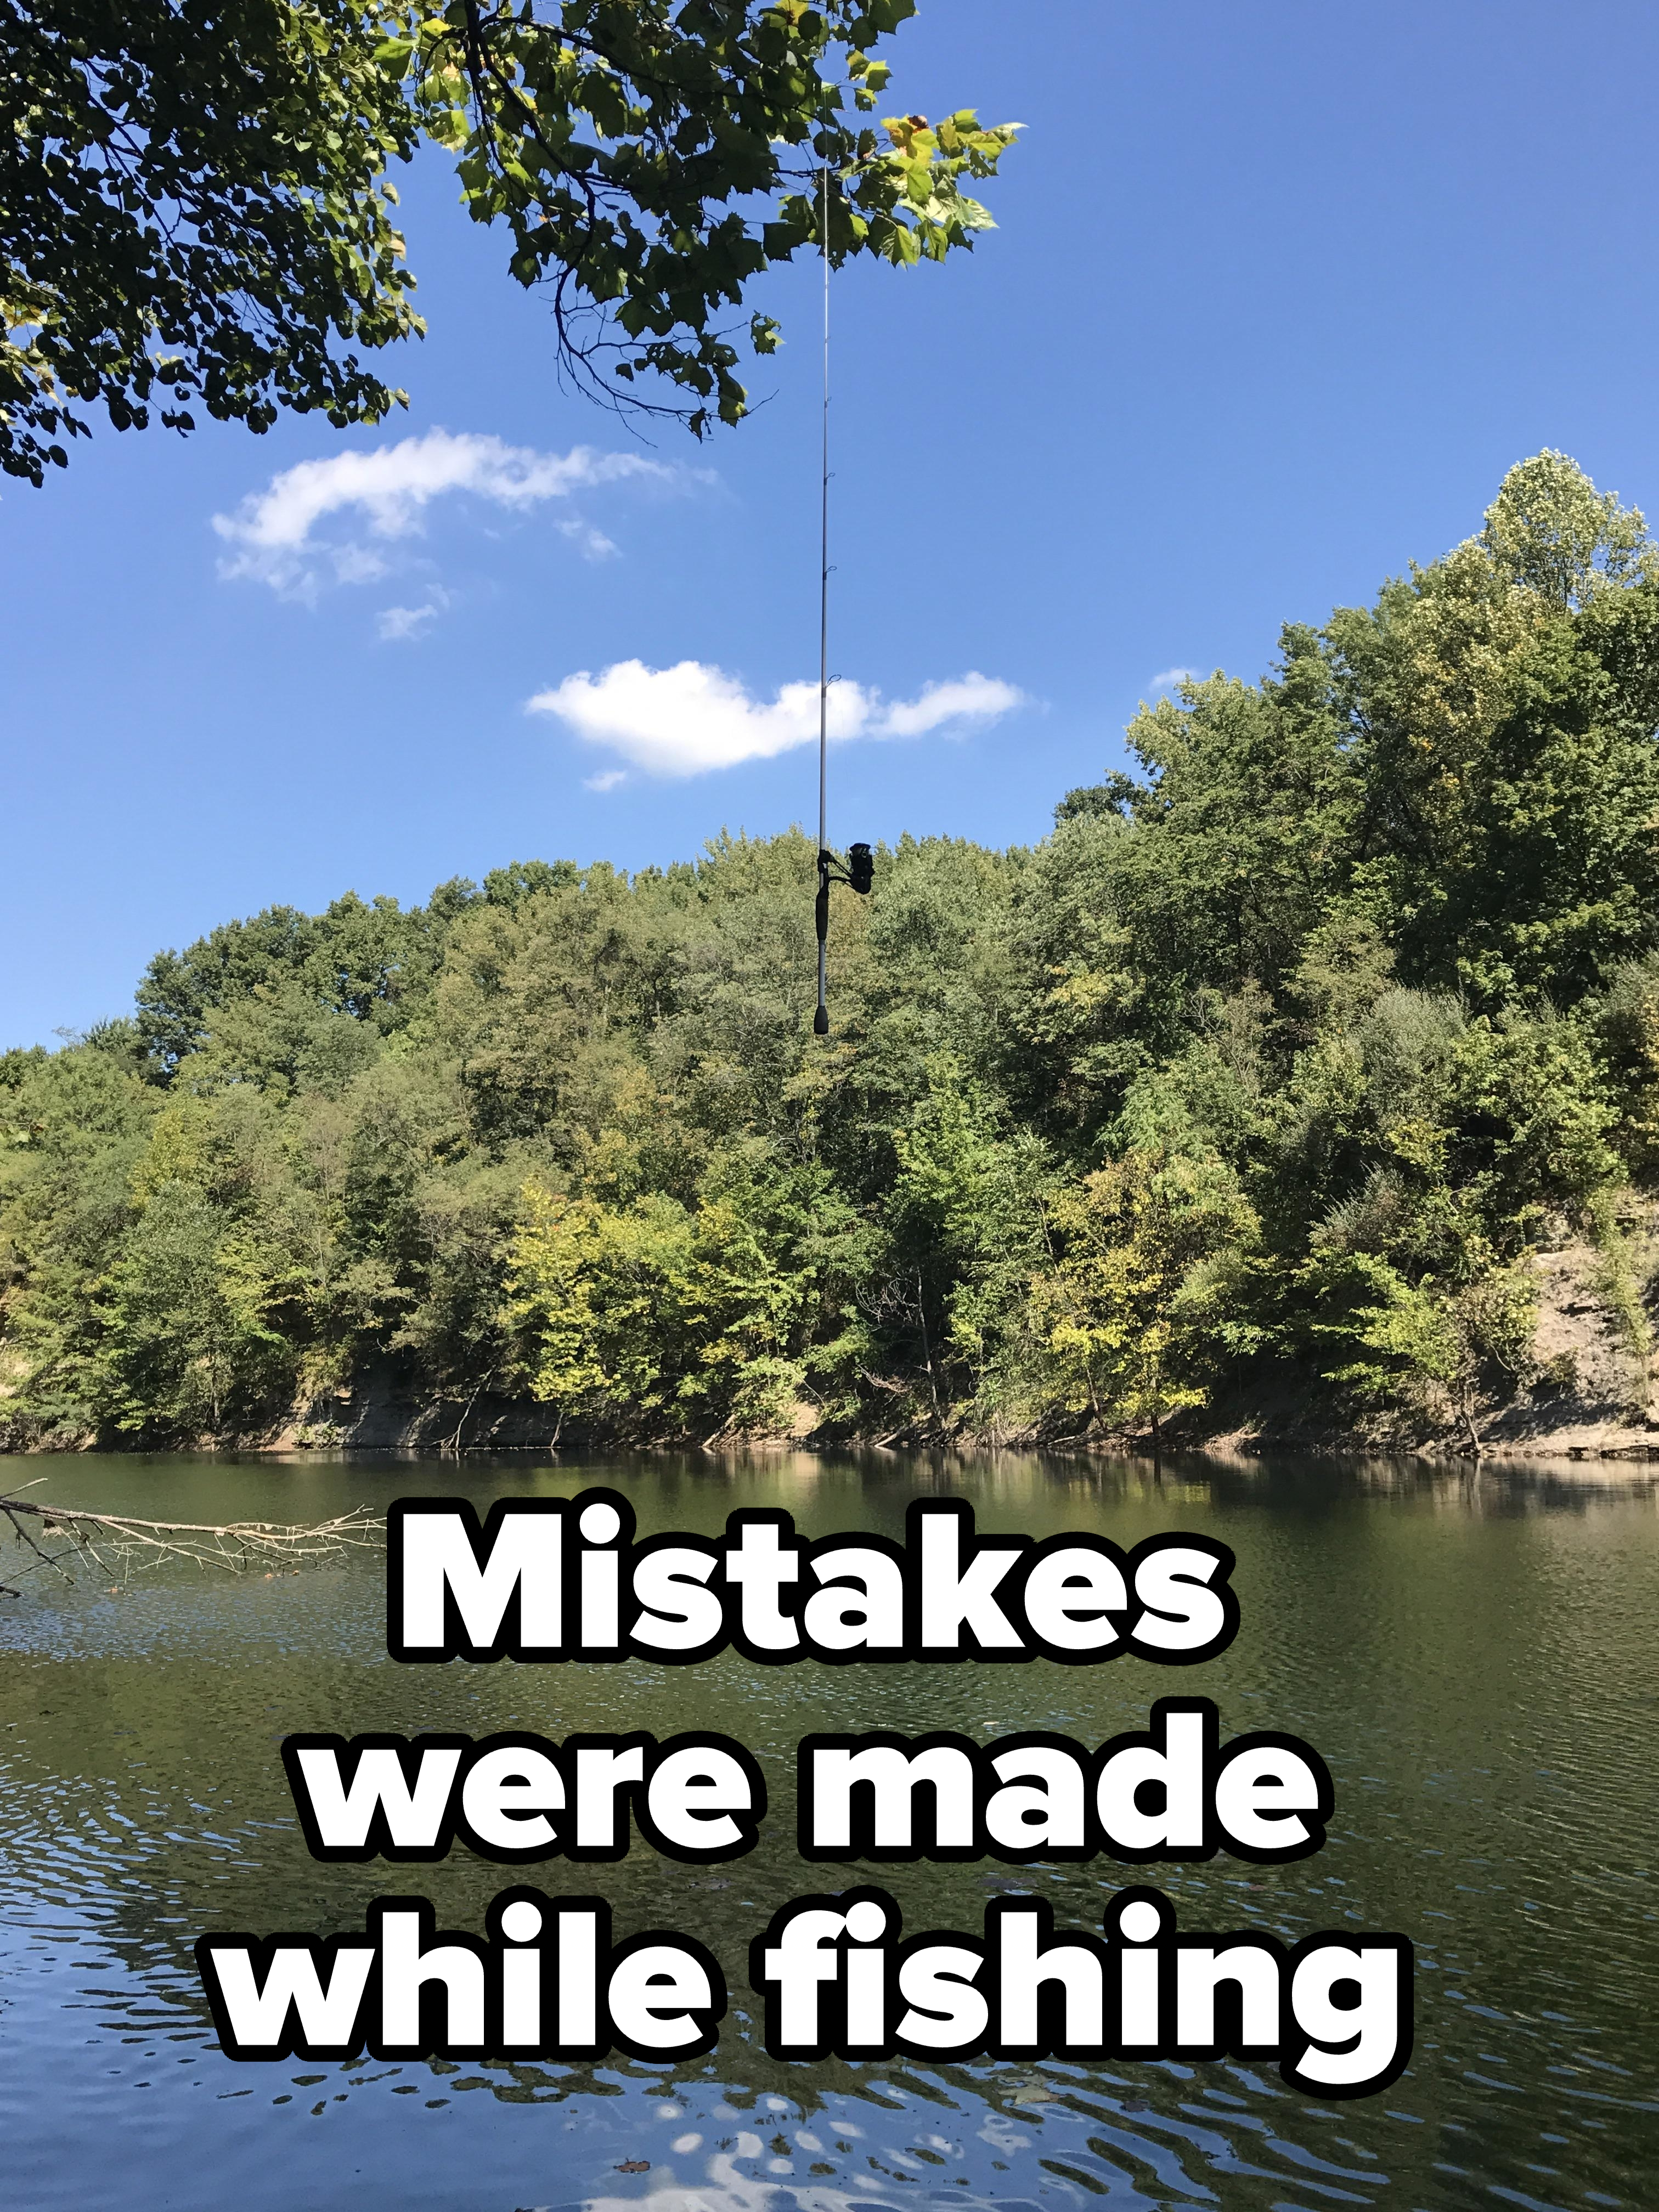 A fishing pole hanging from a tree branch above a river with trees in the background